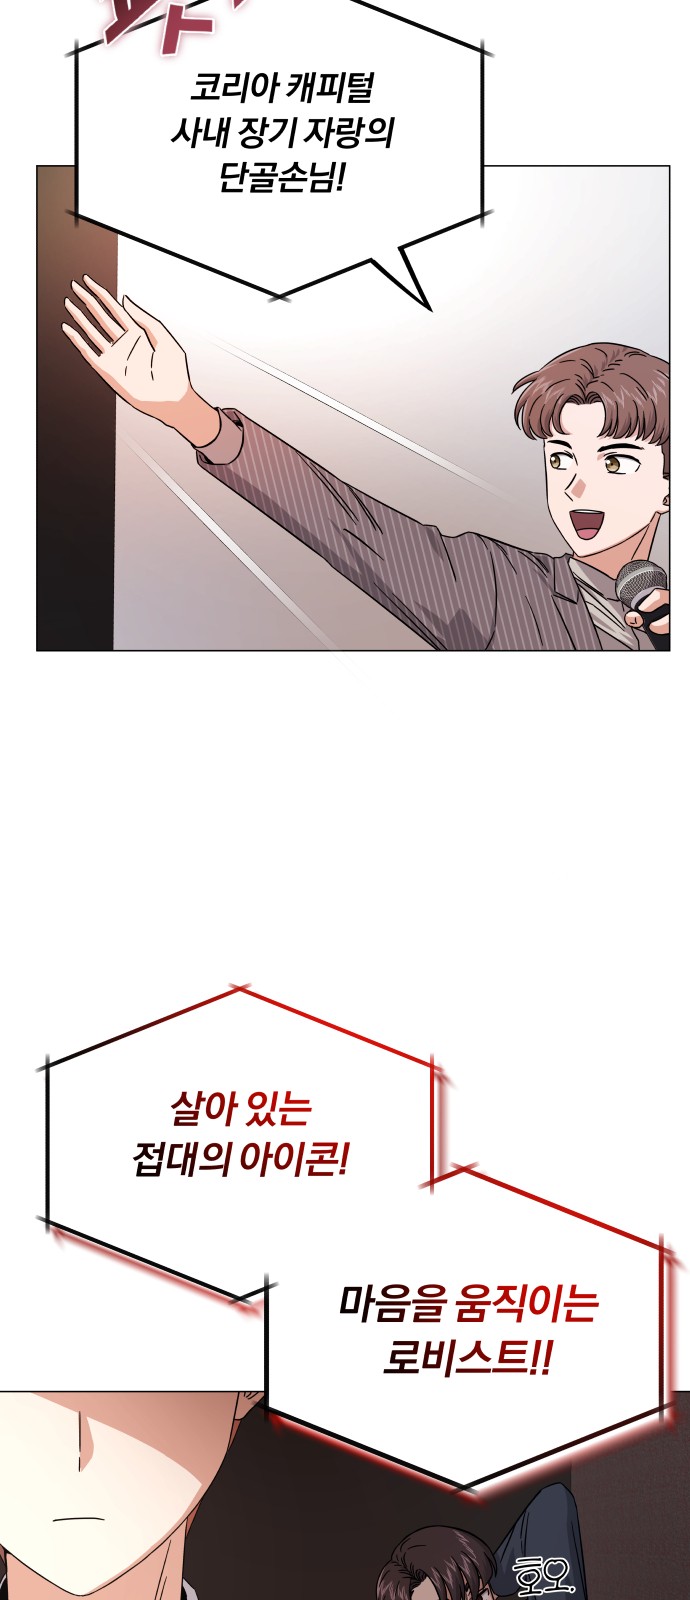 Superstar Cheon Dae-ri - Chapter 10 - Page 2